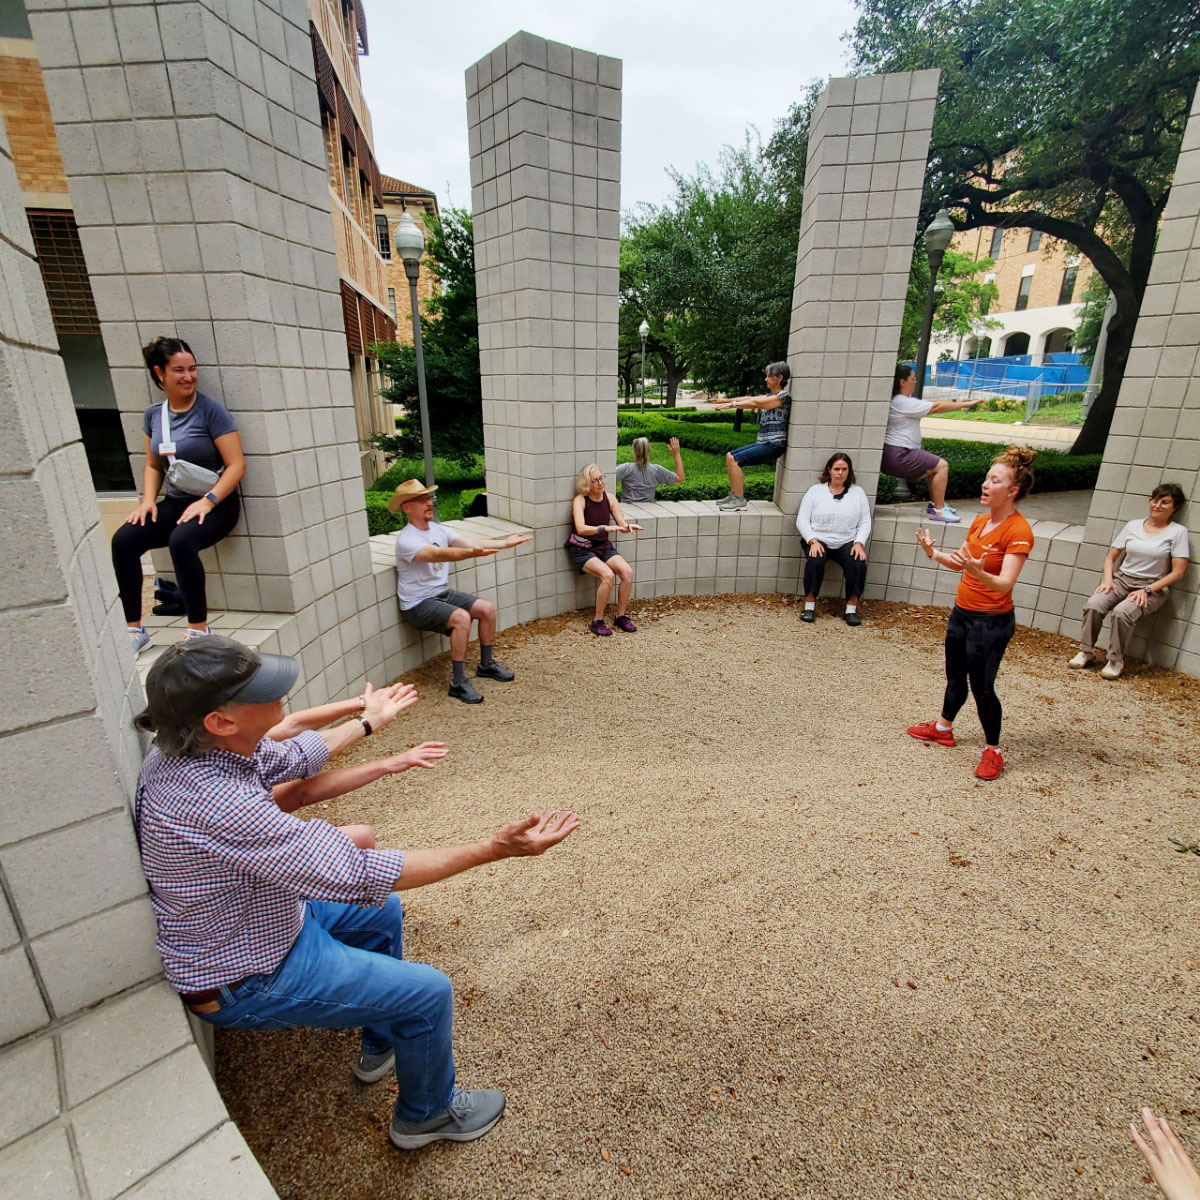 A group of people do wall sits in Sol LeWitt's "Circle with Towers"